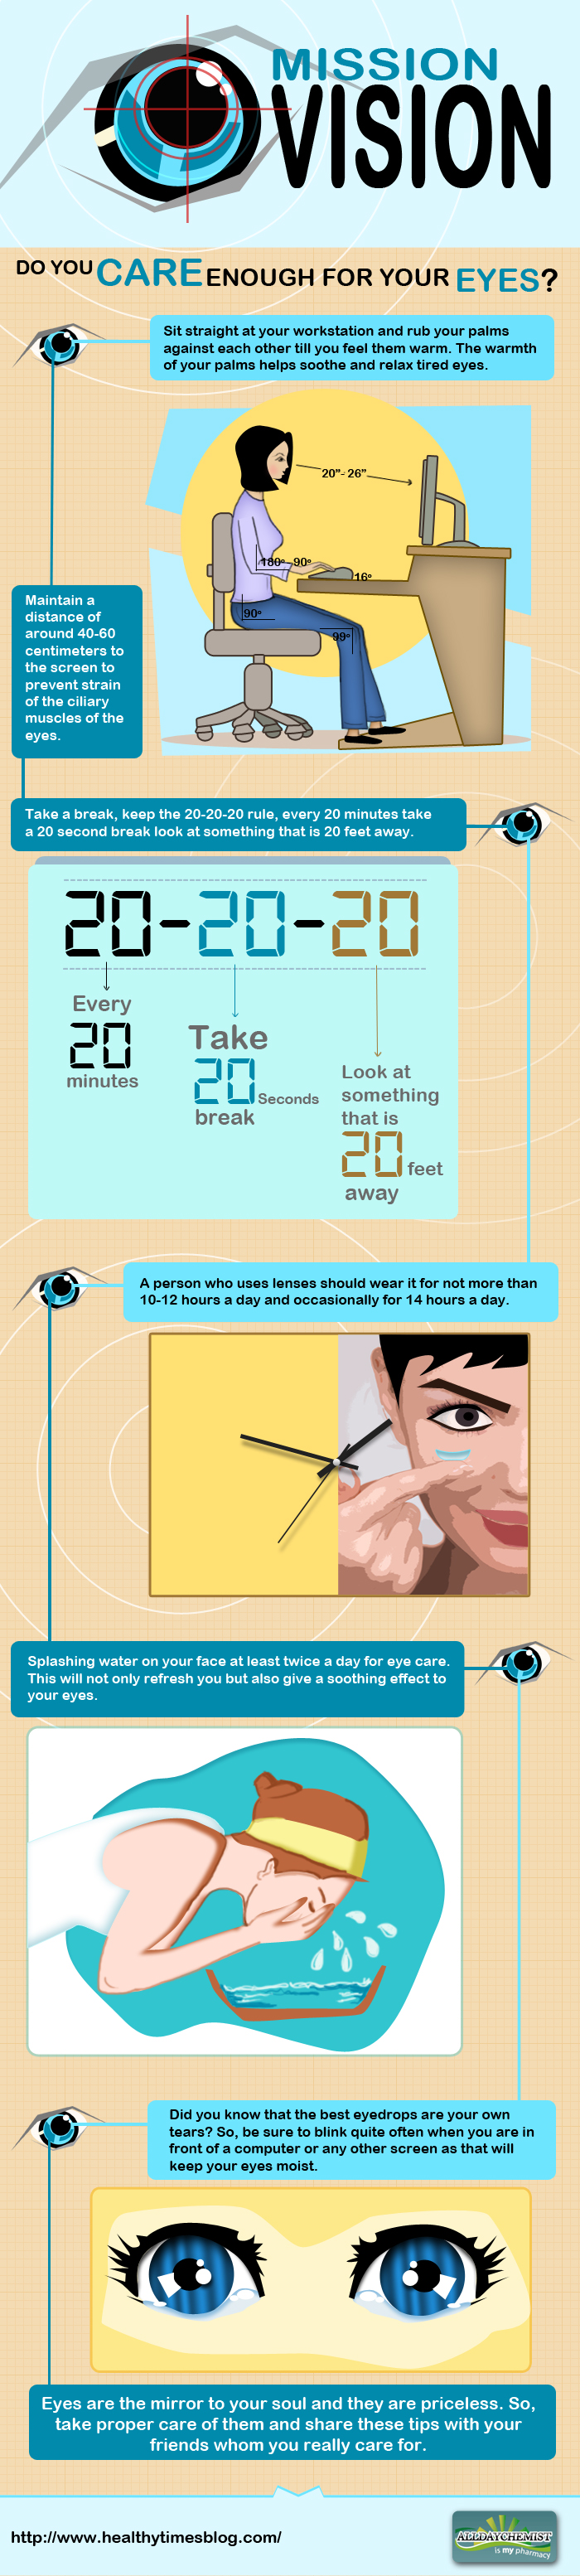 How to Care for Your Eyes 